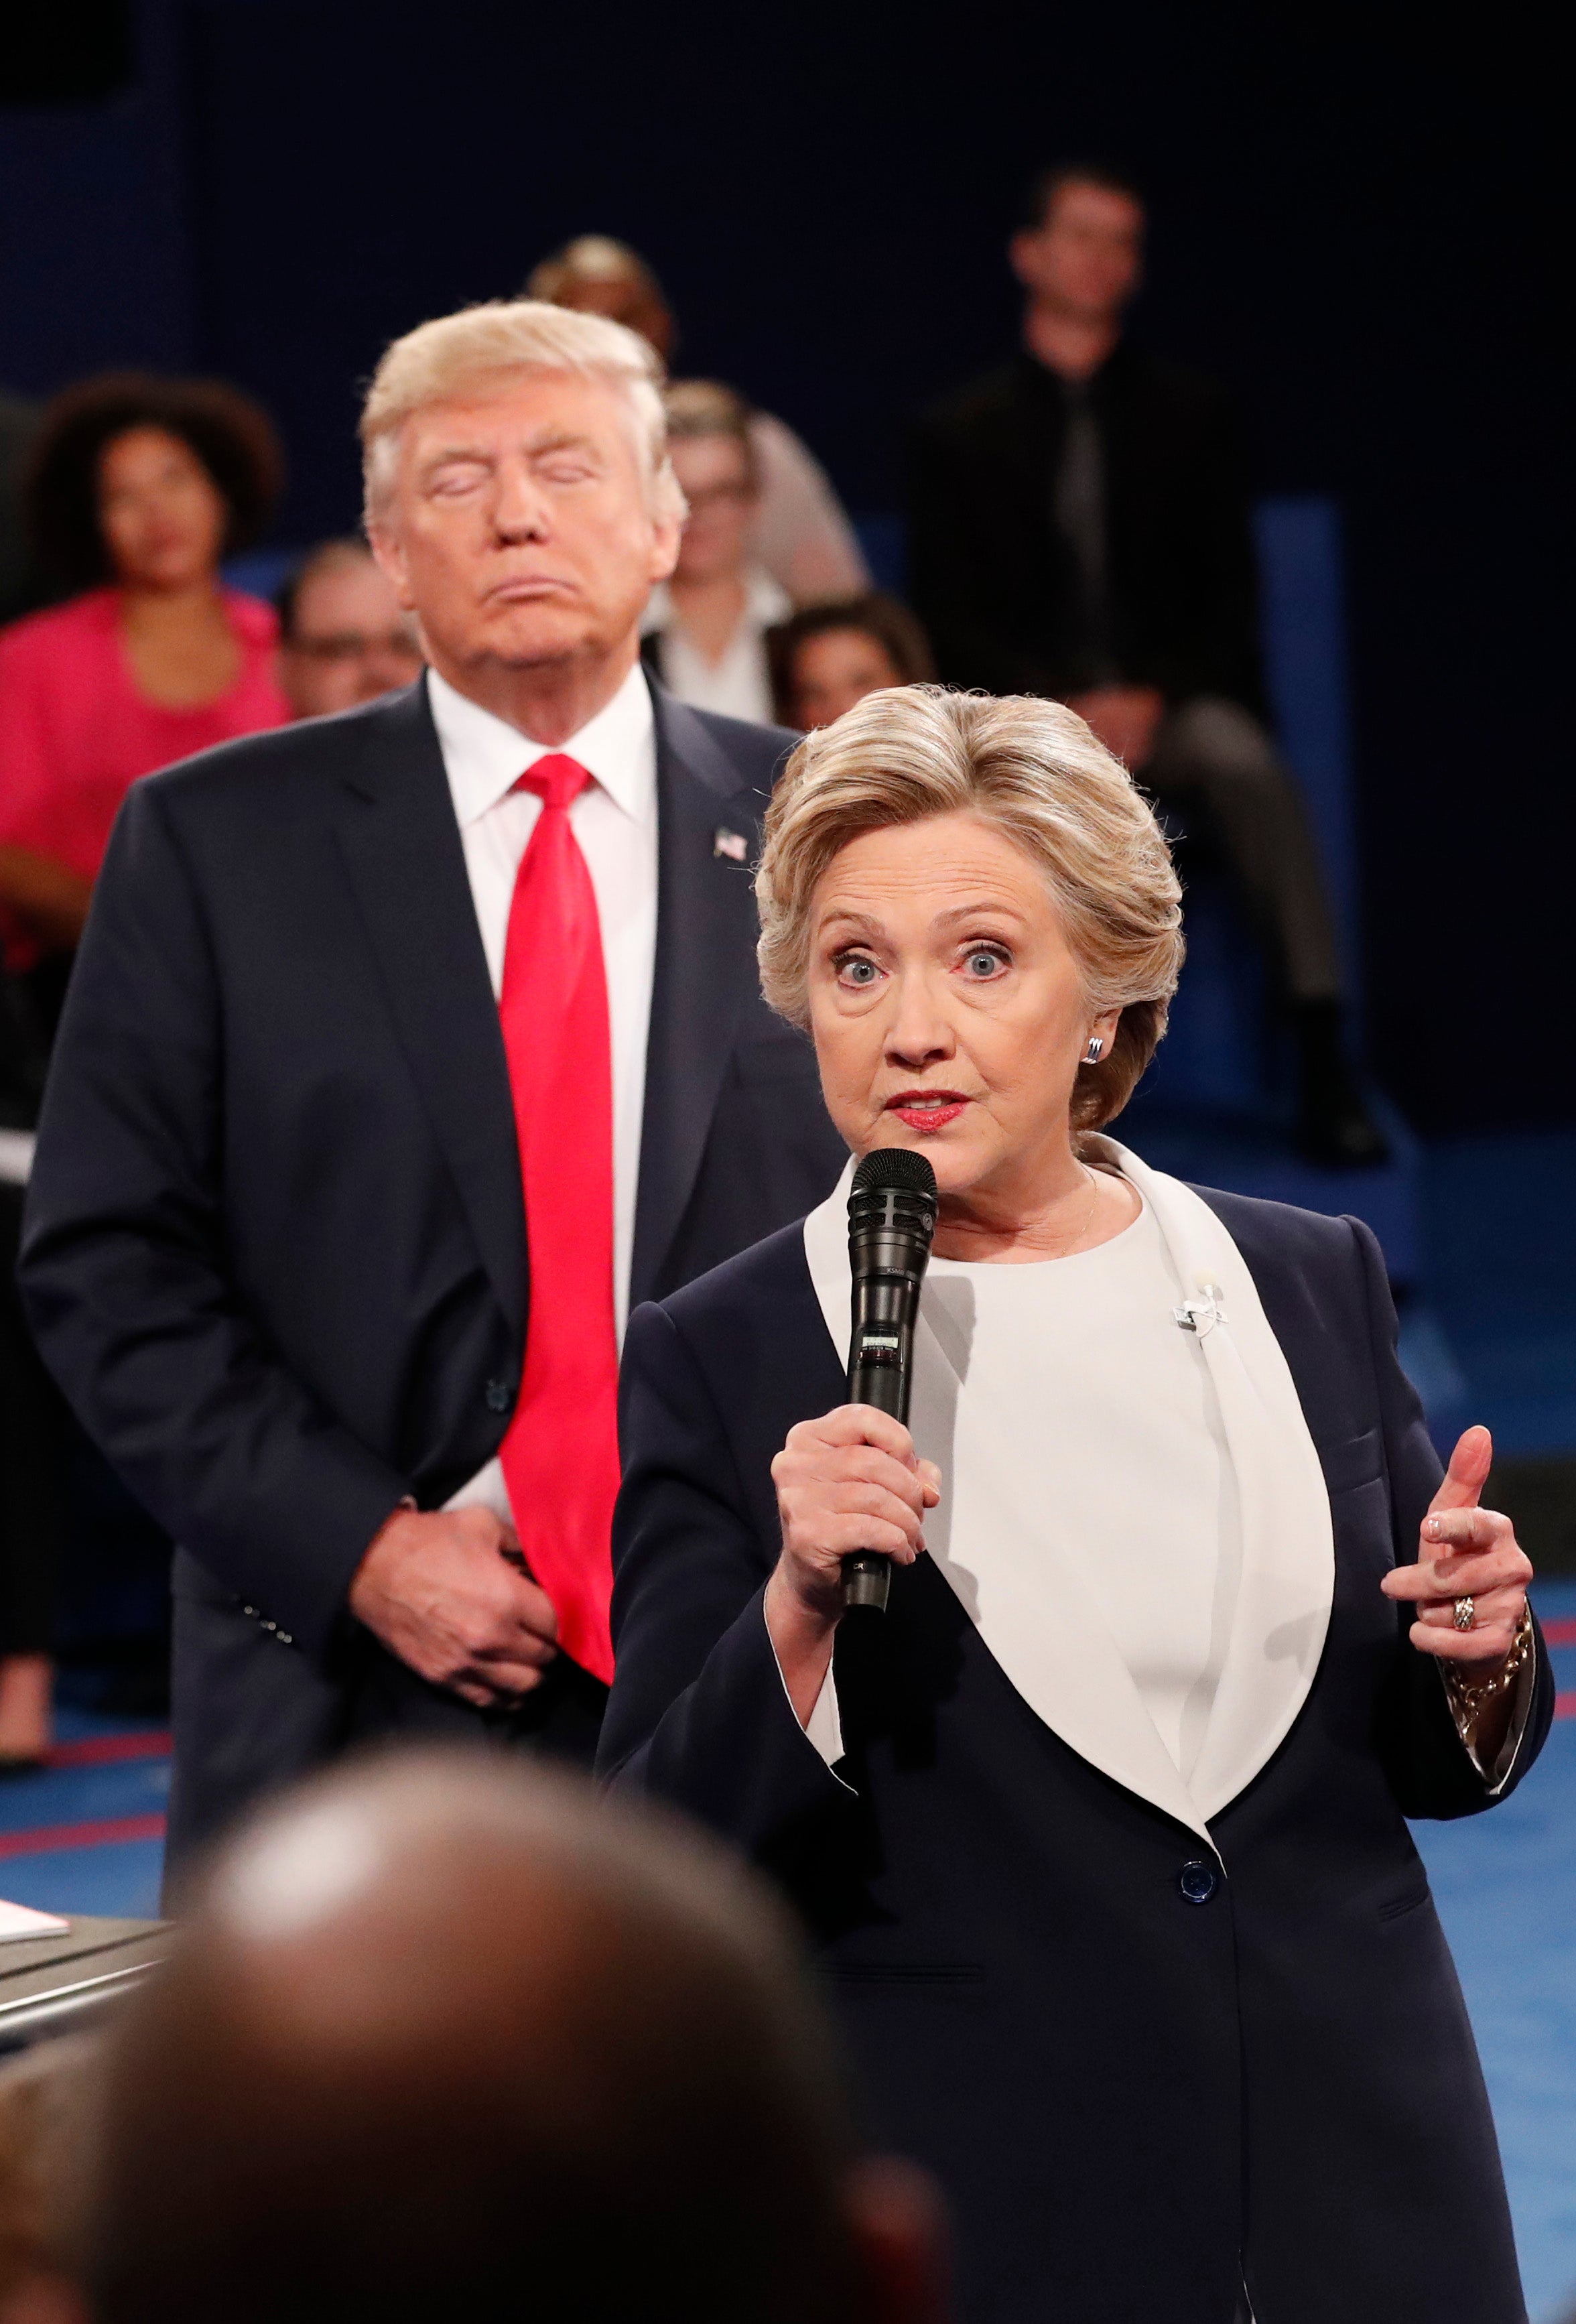 Here's How the Audience Responded to Last Night's Presidential Debate
